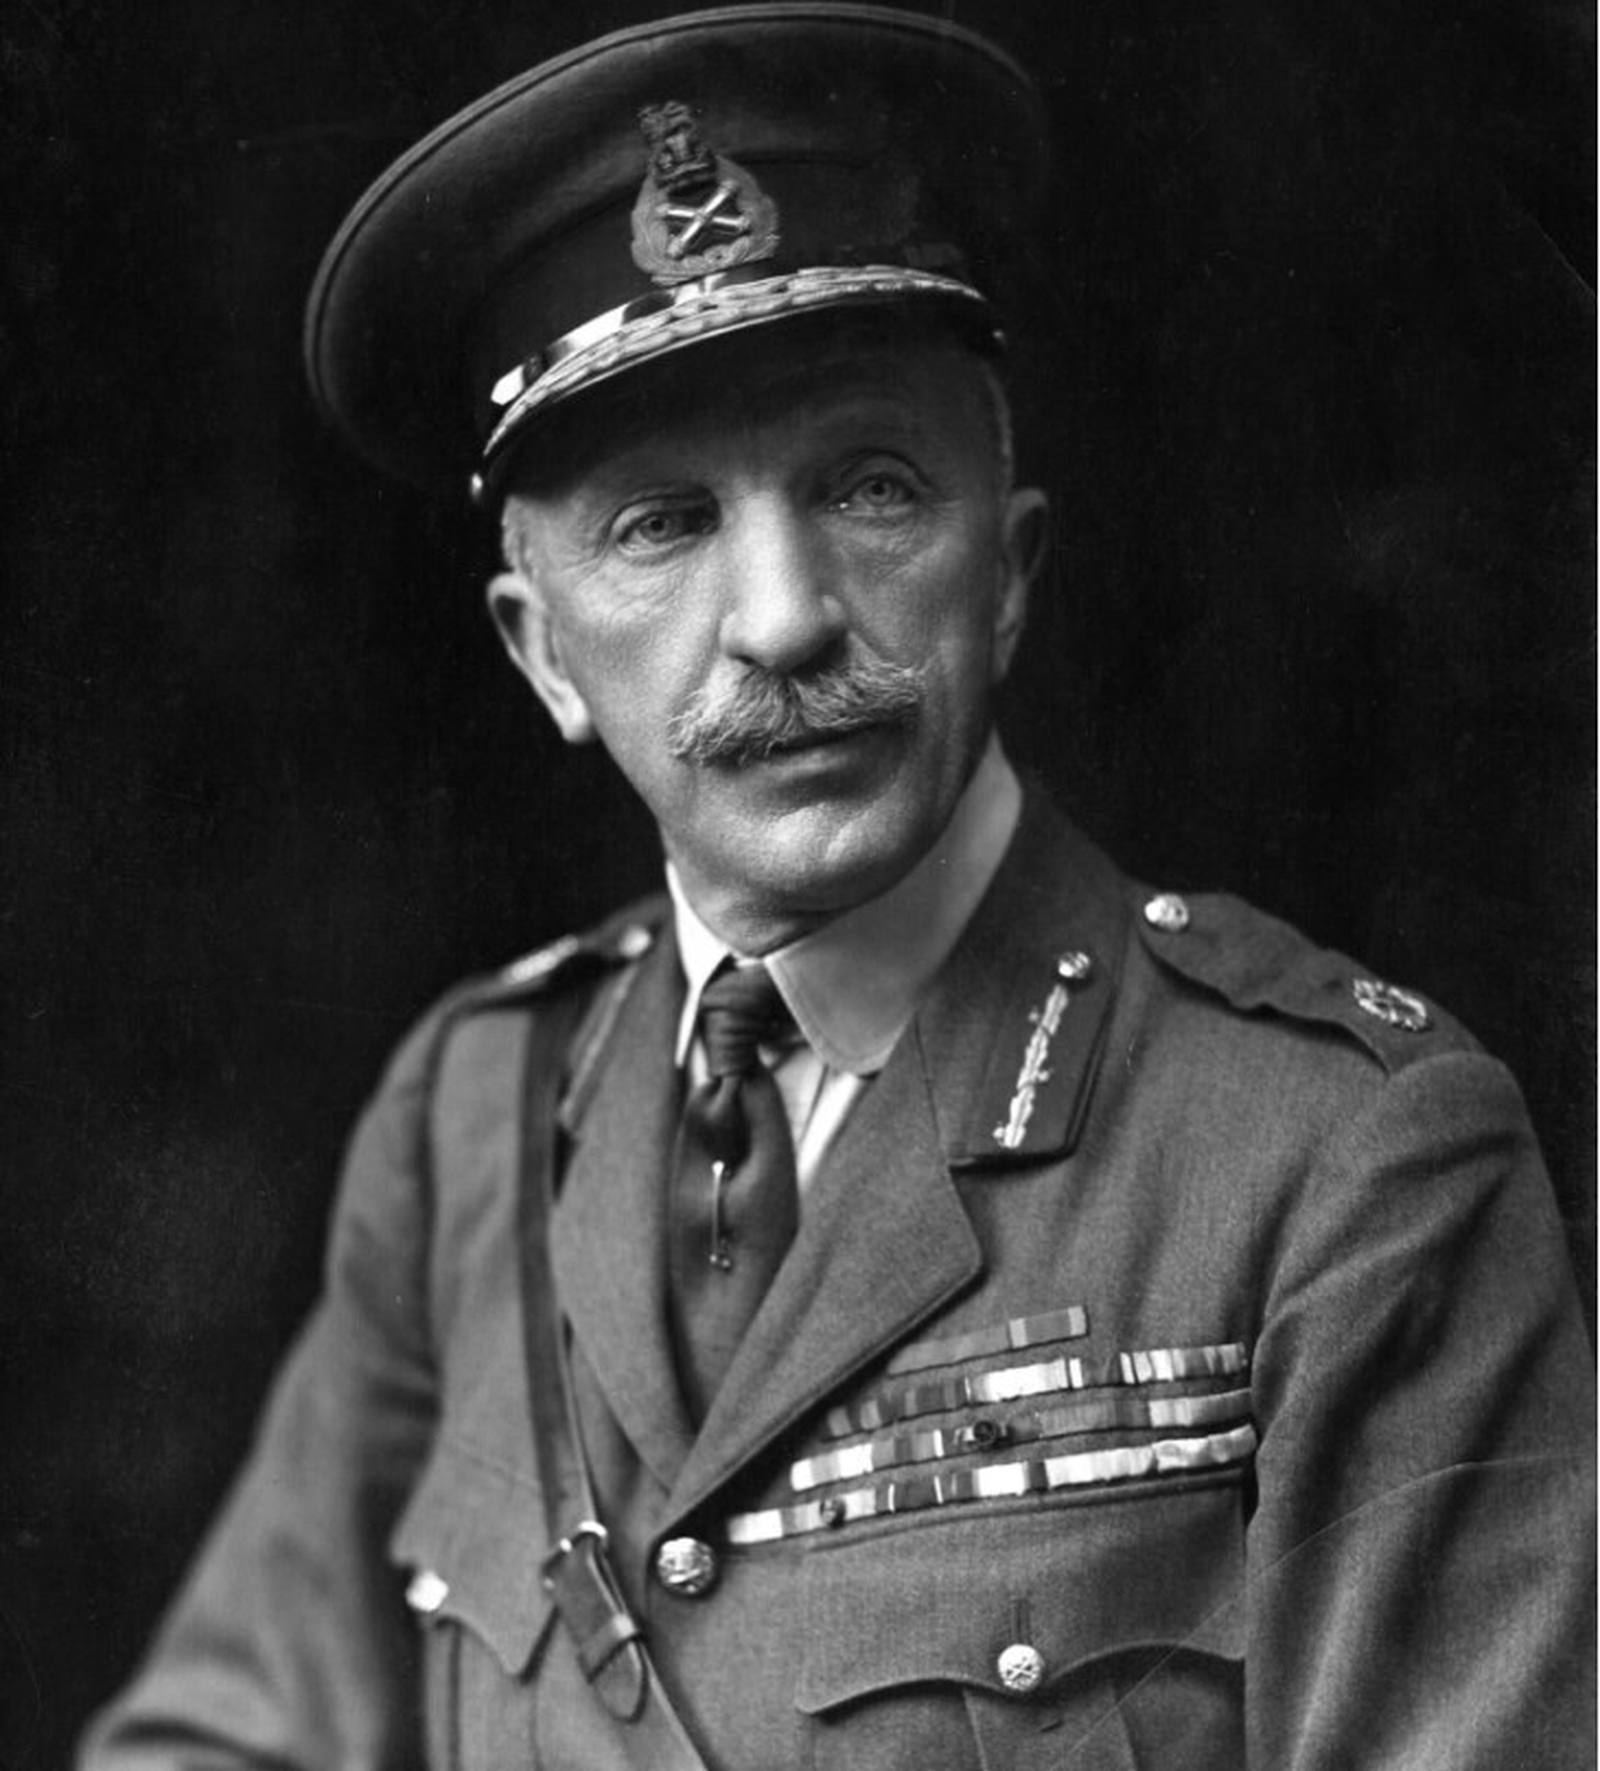 Image - Field Marshal Sir Henry Wilson (Credit: Getty Images)